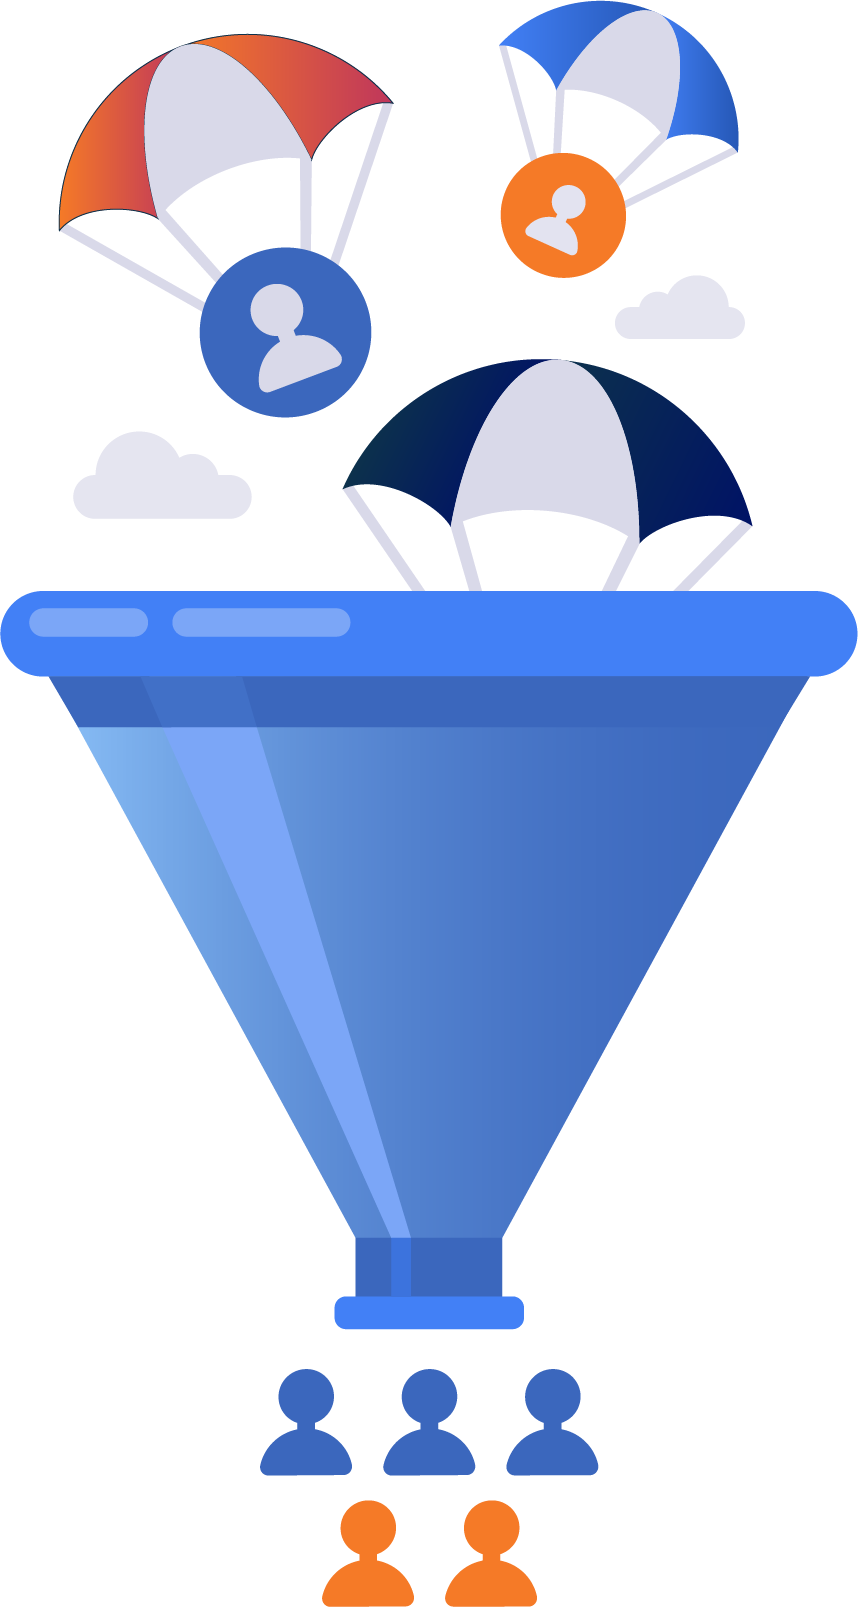 Parachutes landing in a funnel to create leads through marketing automation